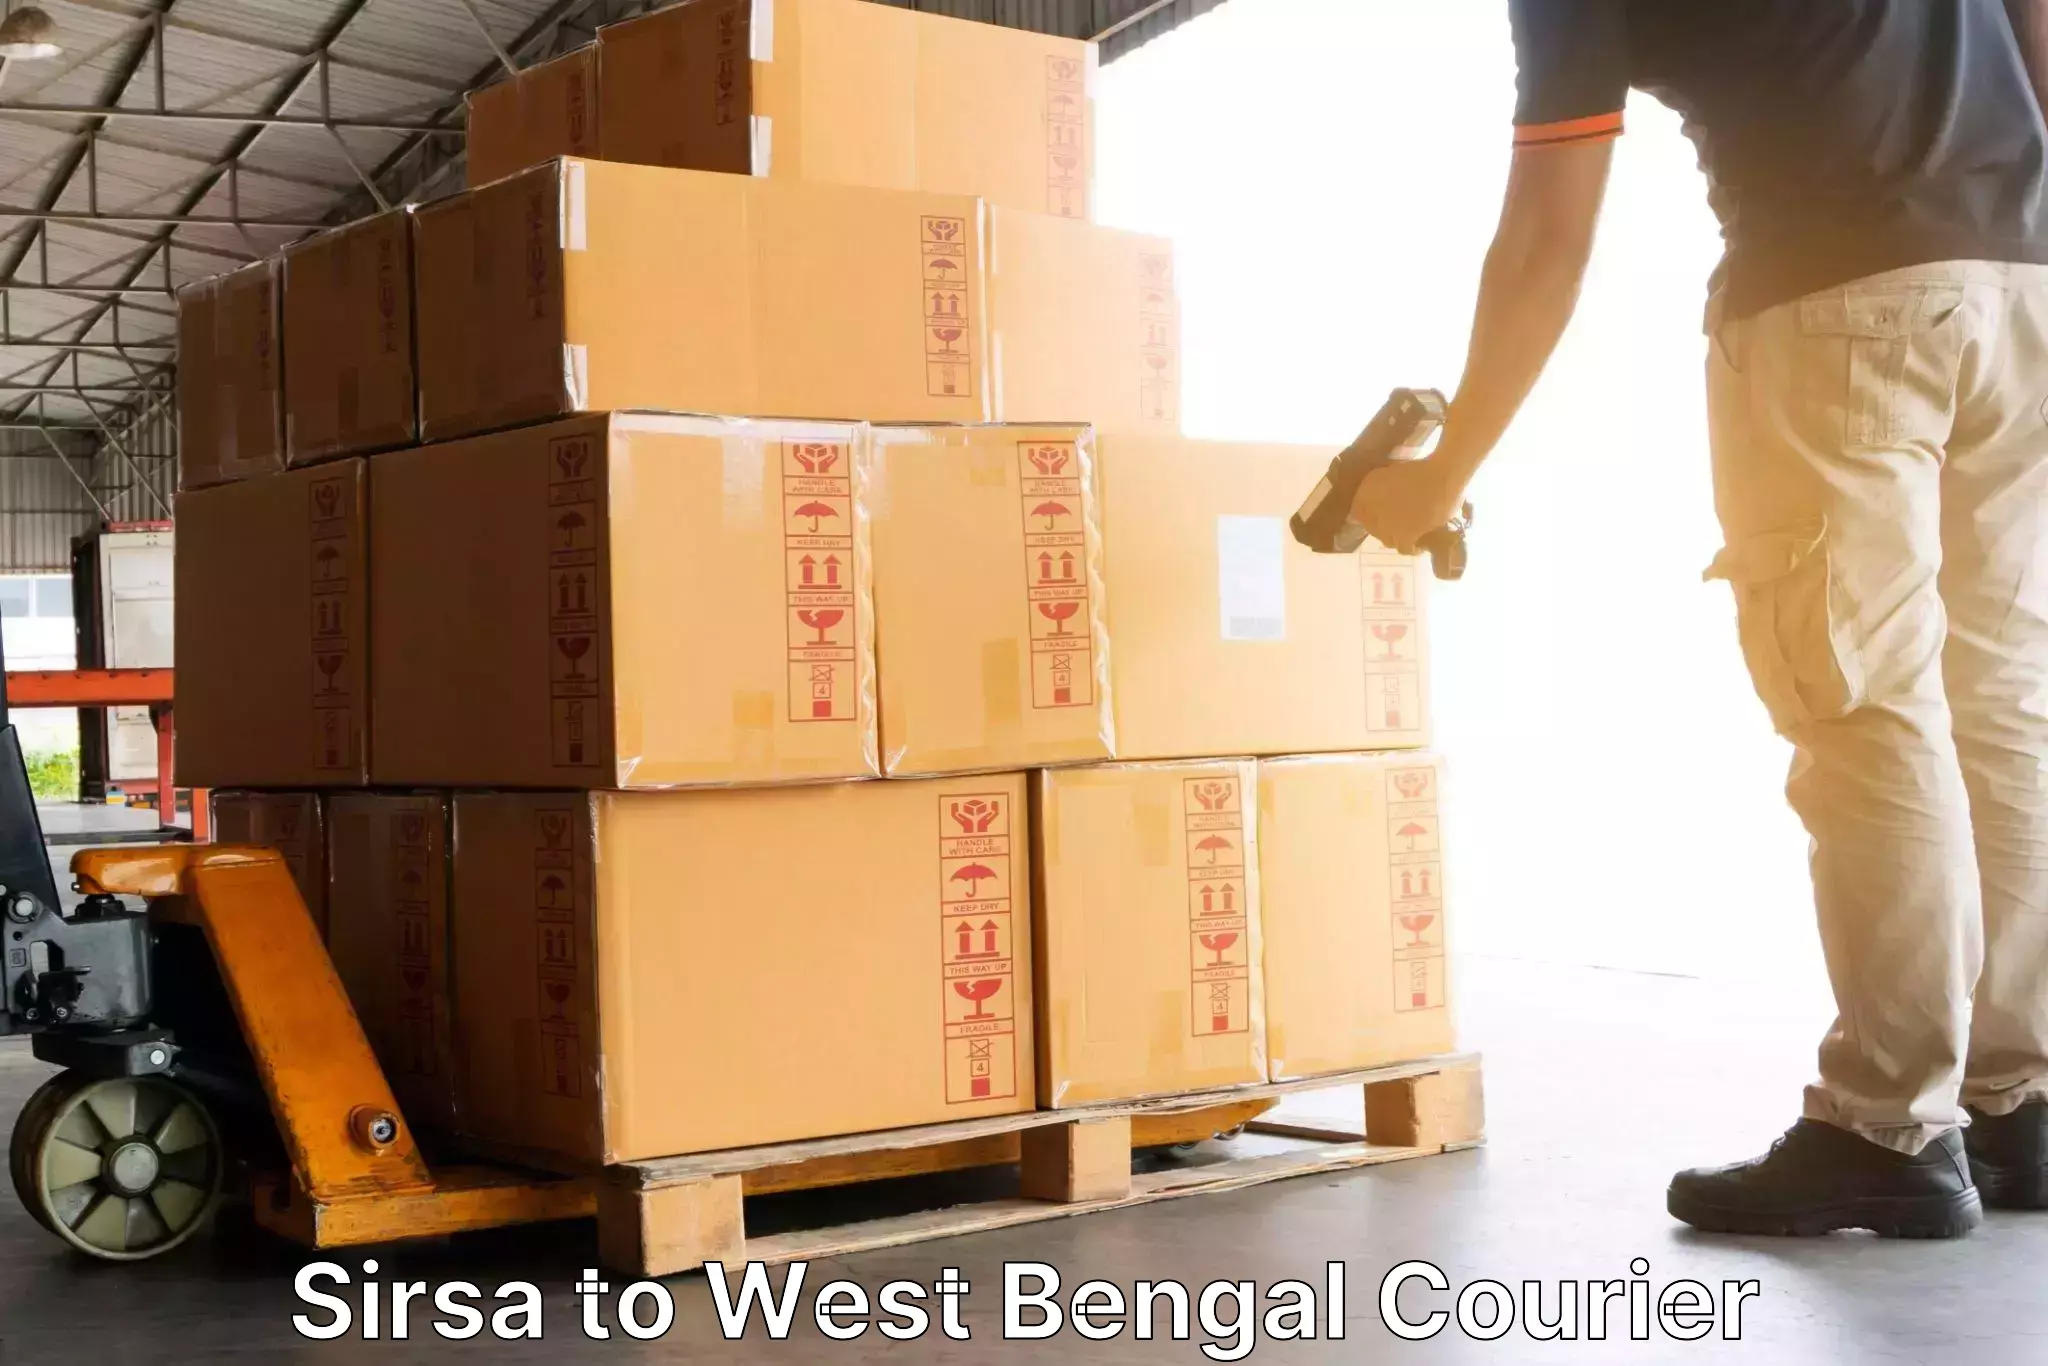 Courier dispatch services in Sirsa to Kakdwip